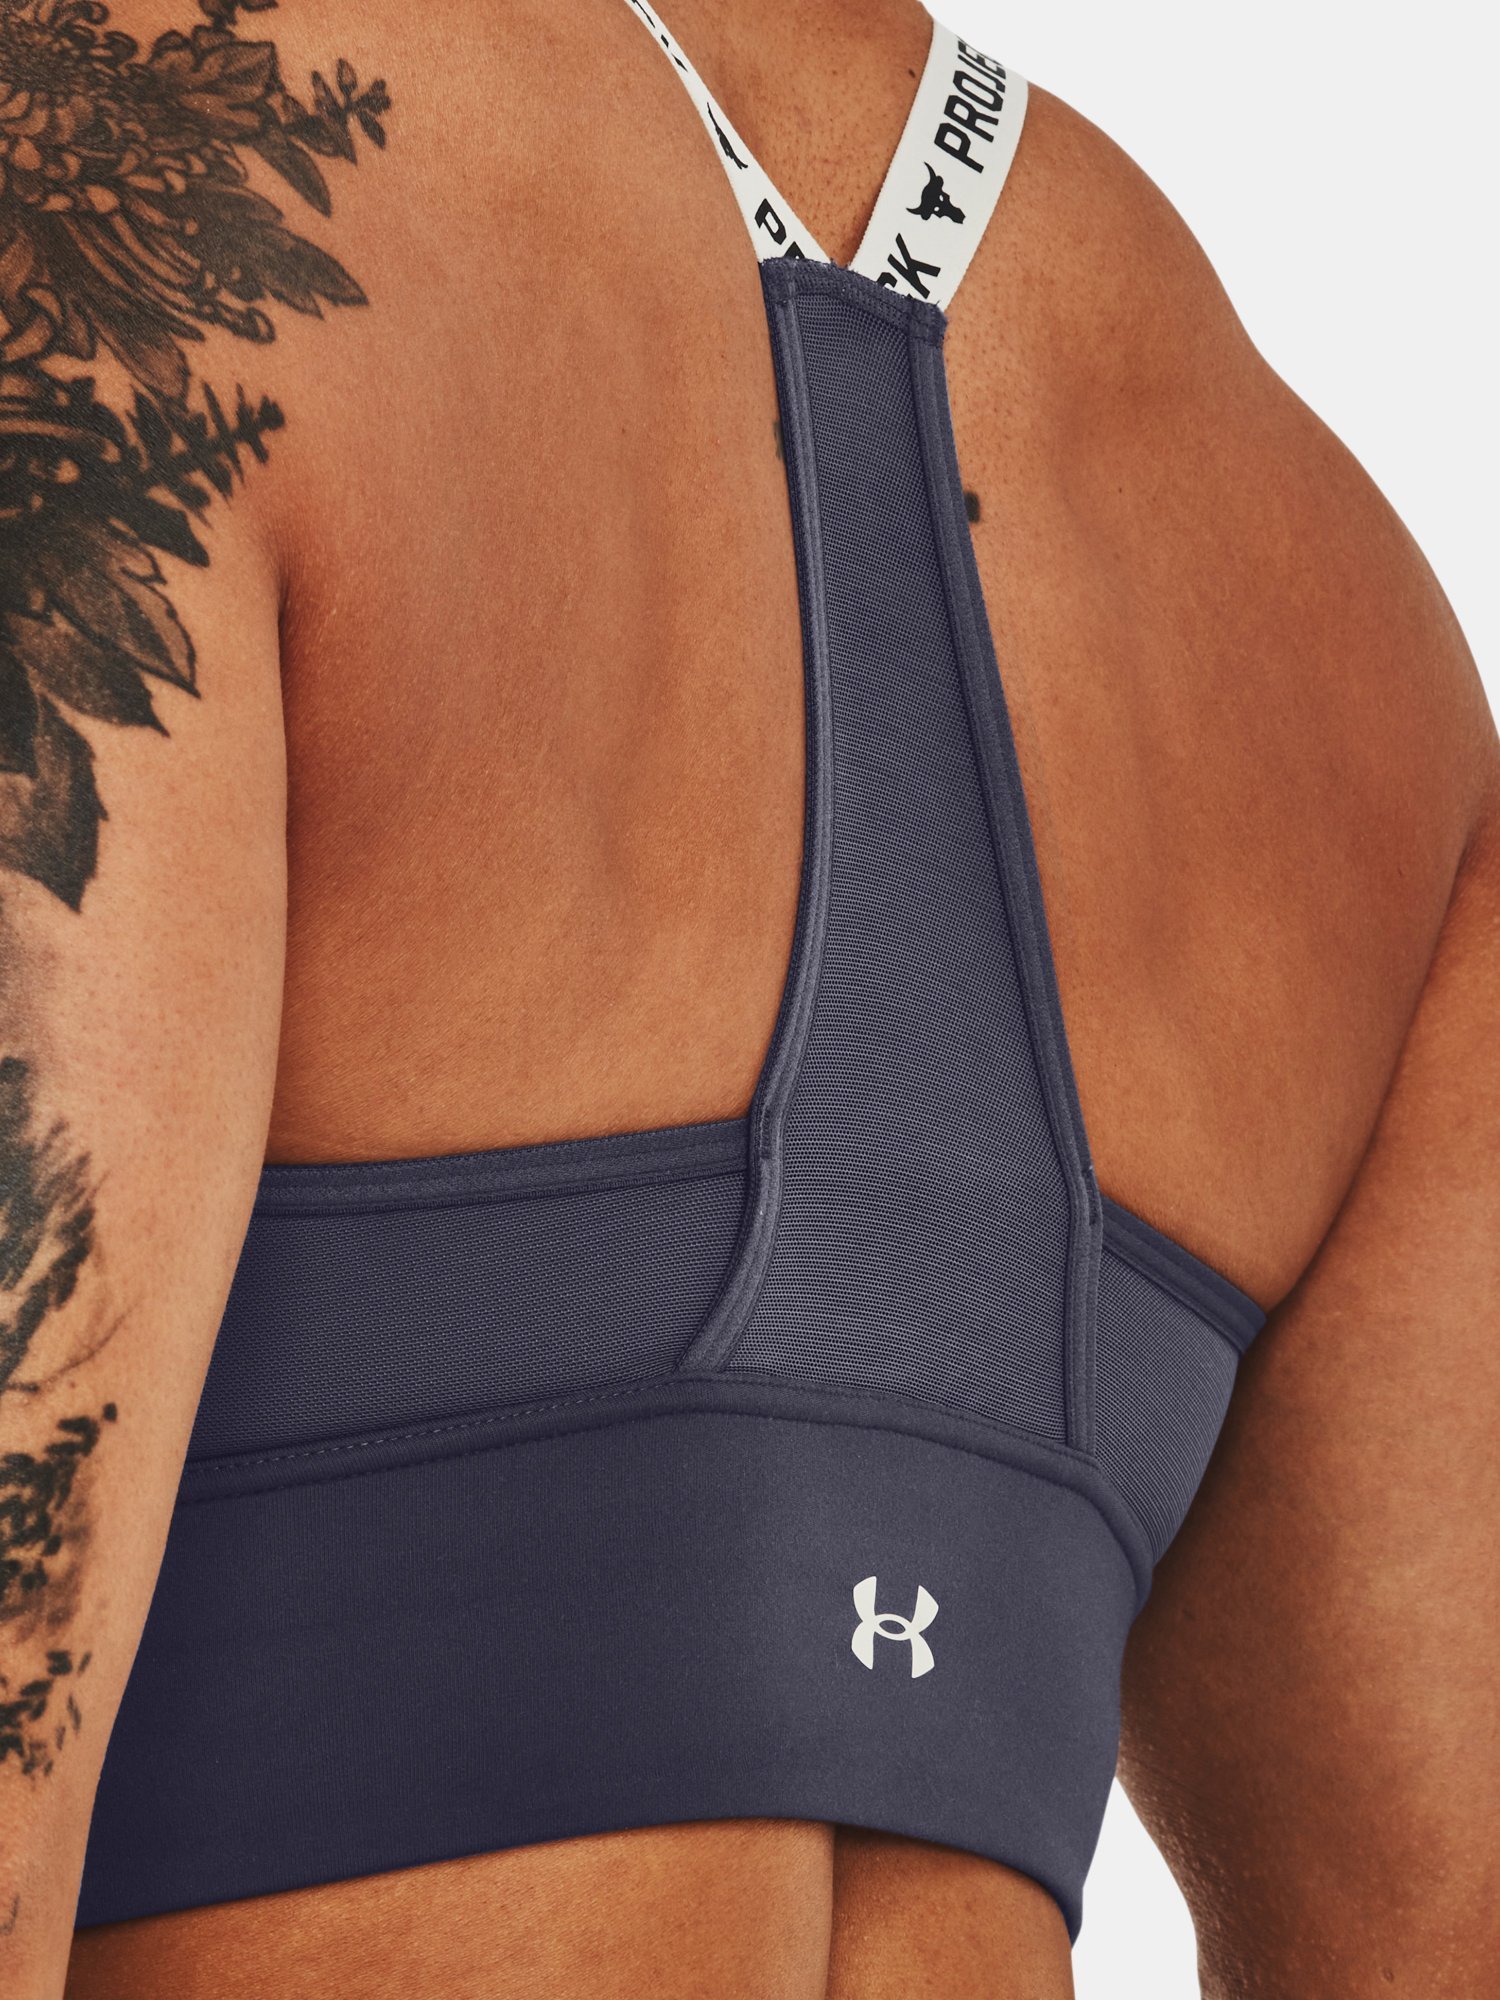 Under Armour Pjt Rock Infty Mid Bra-GRY